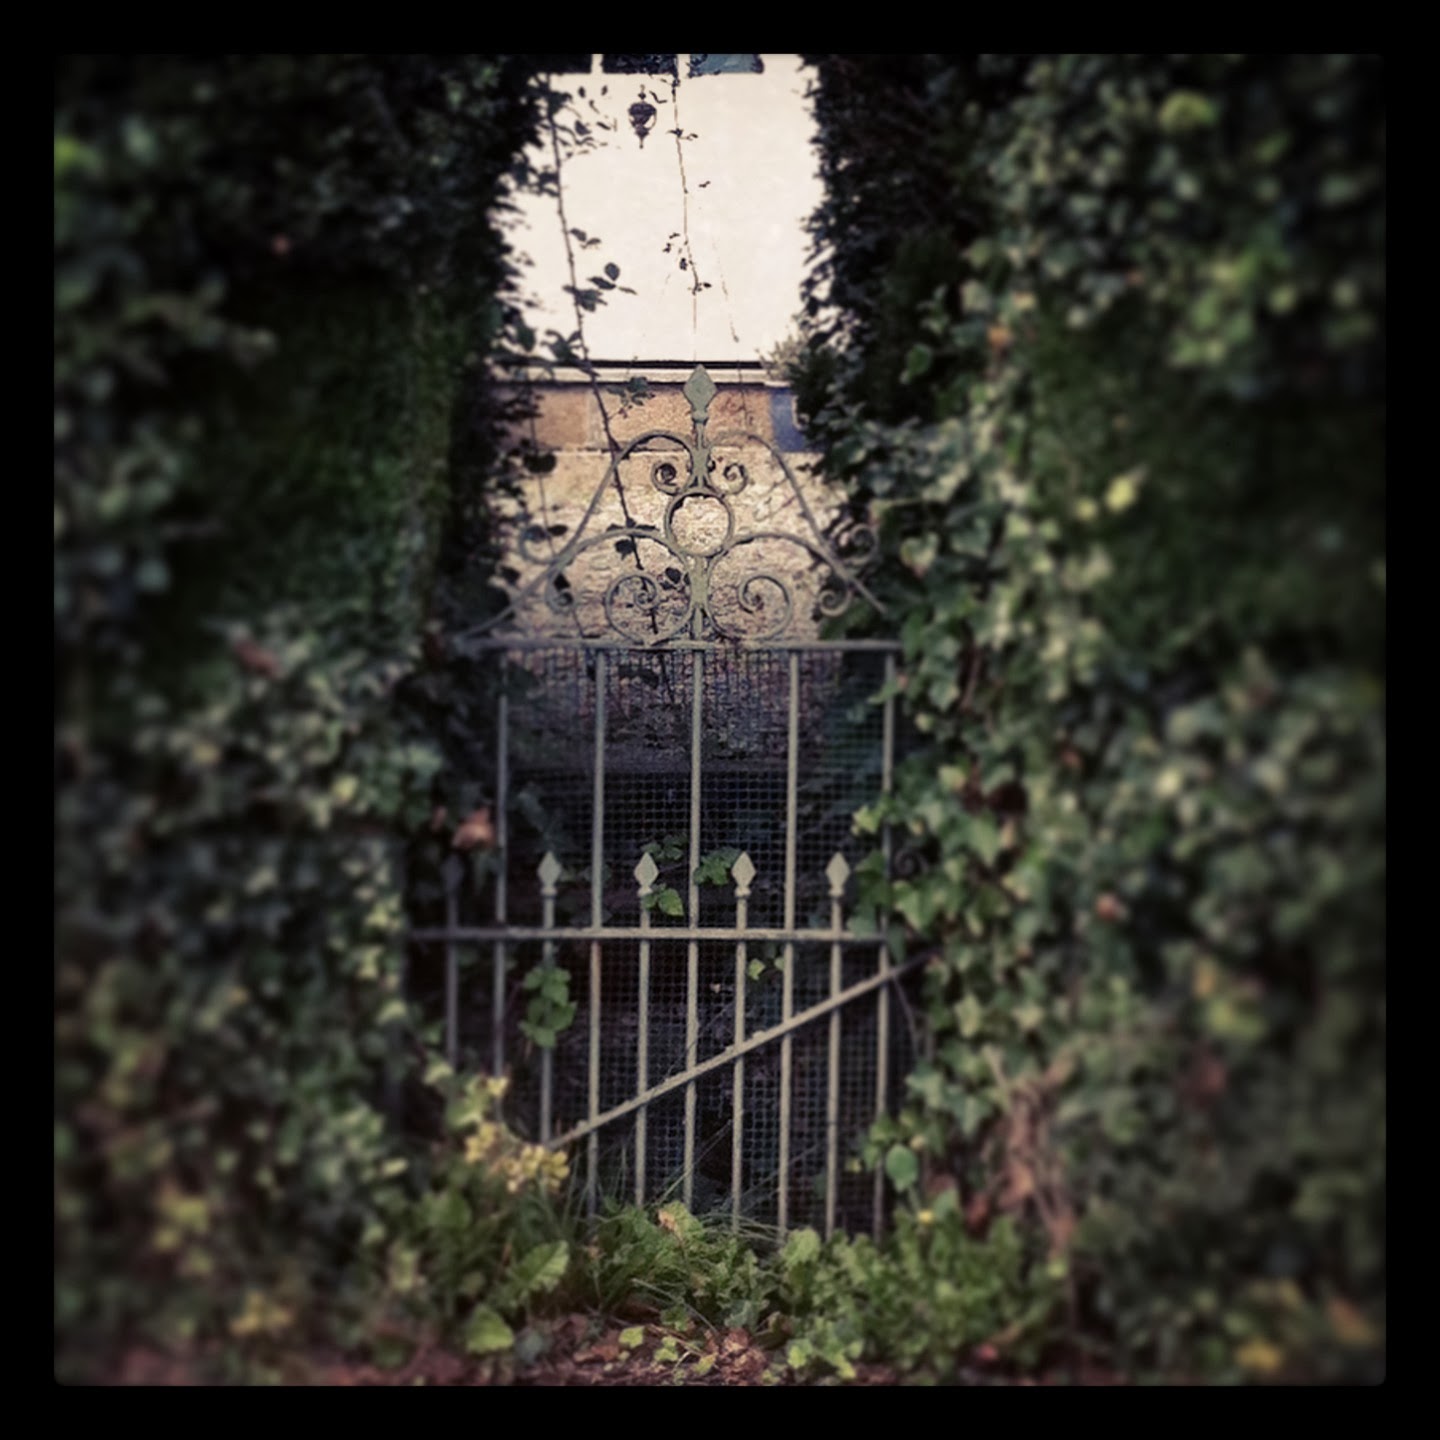 A Gate that leads to thoughts and things